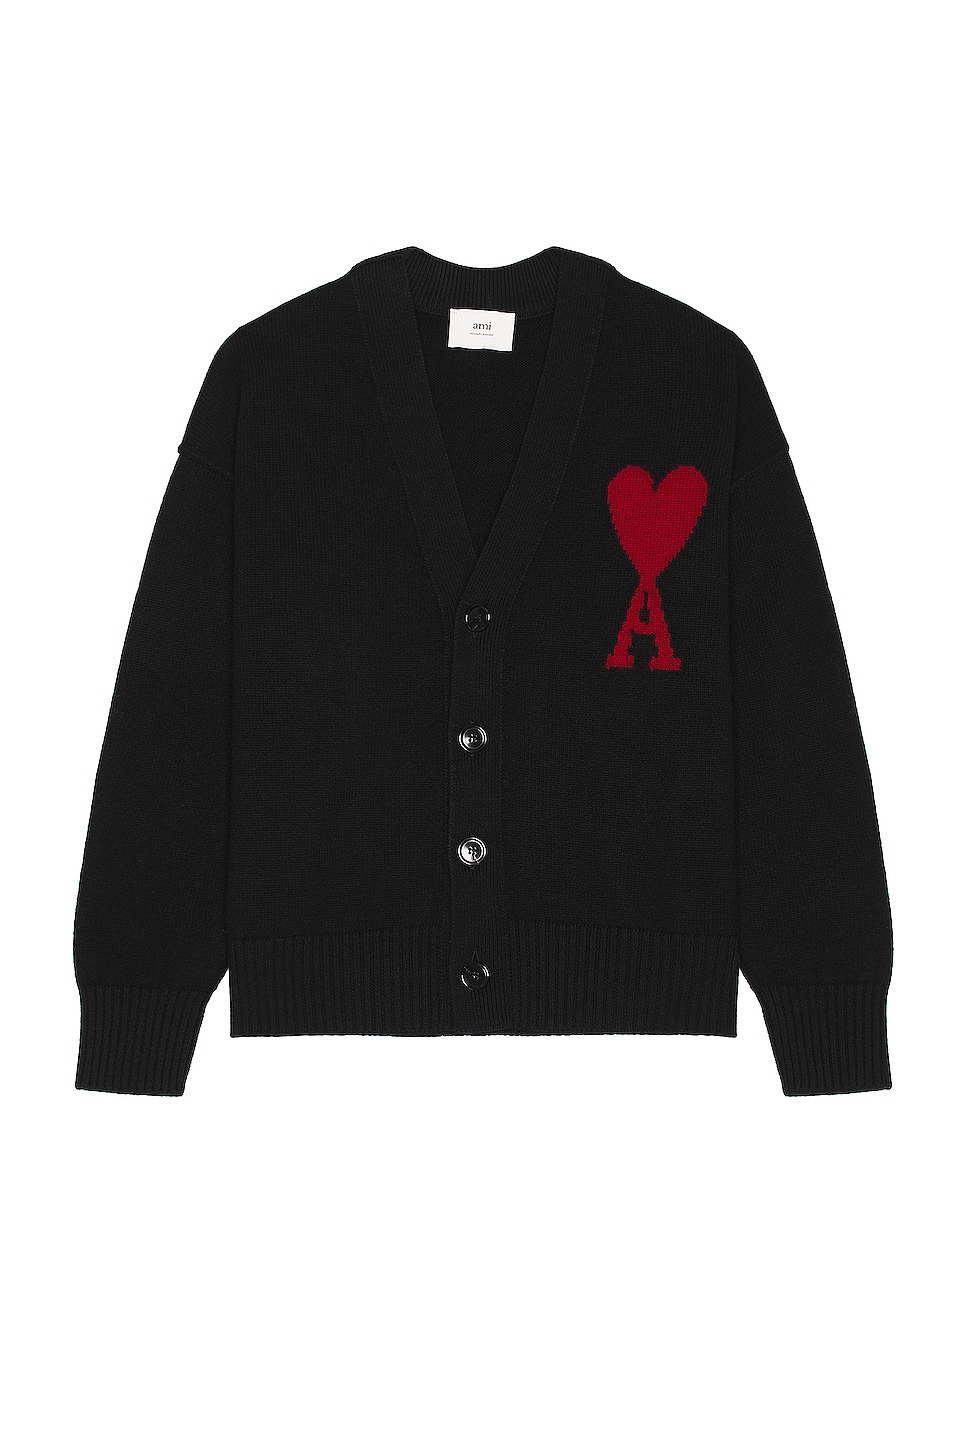 Image 1 of ami Red ADC Cardigan in Black & Red